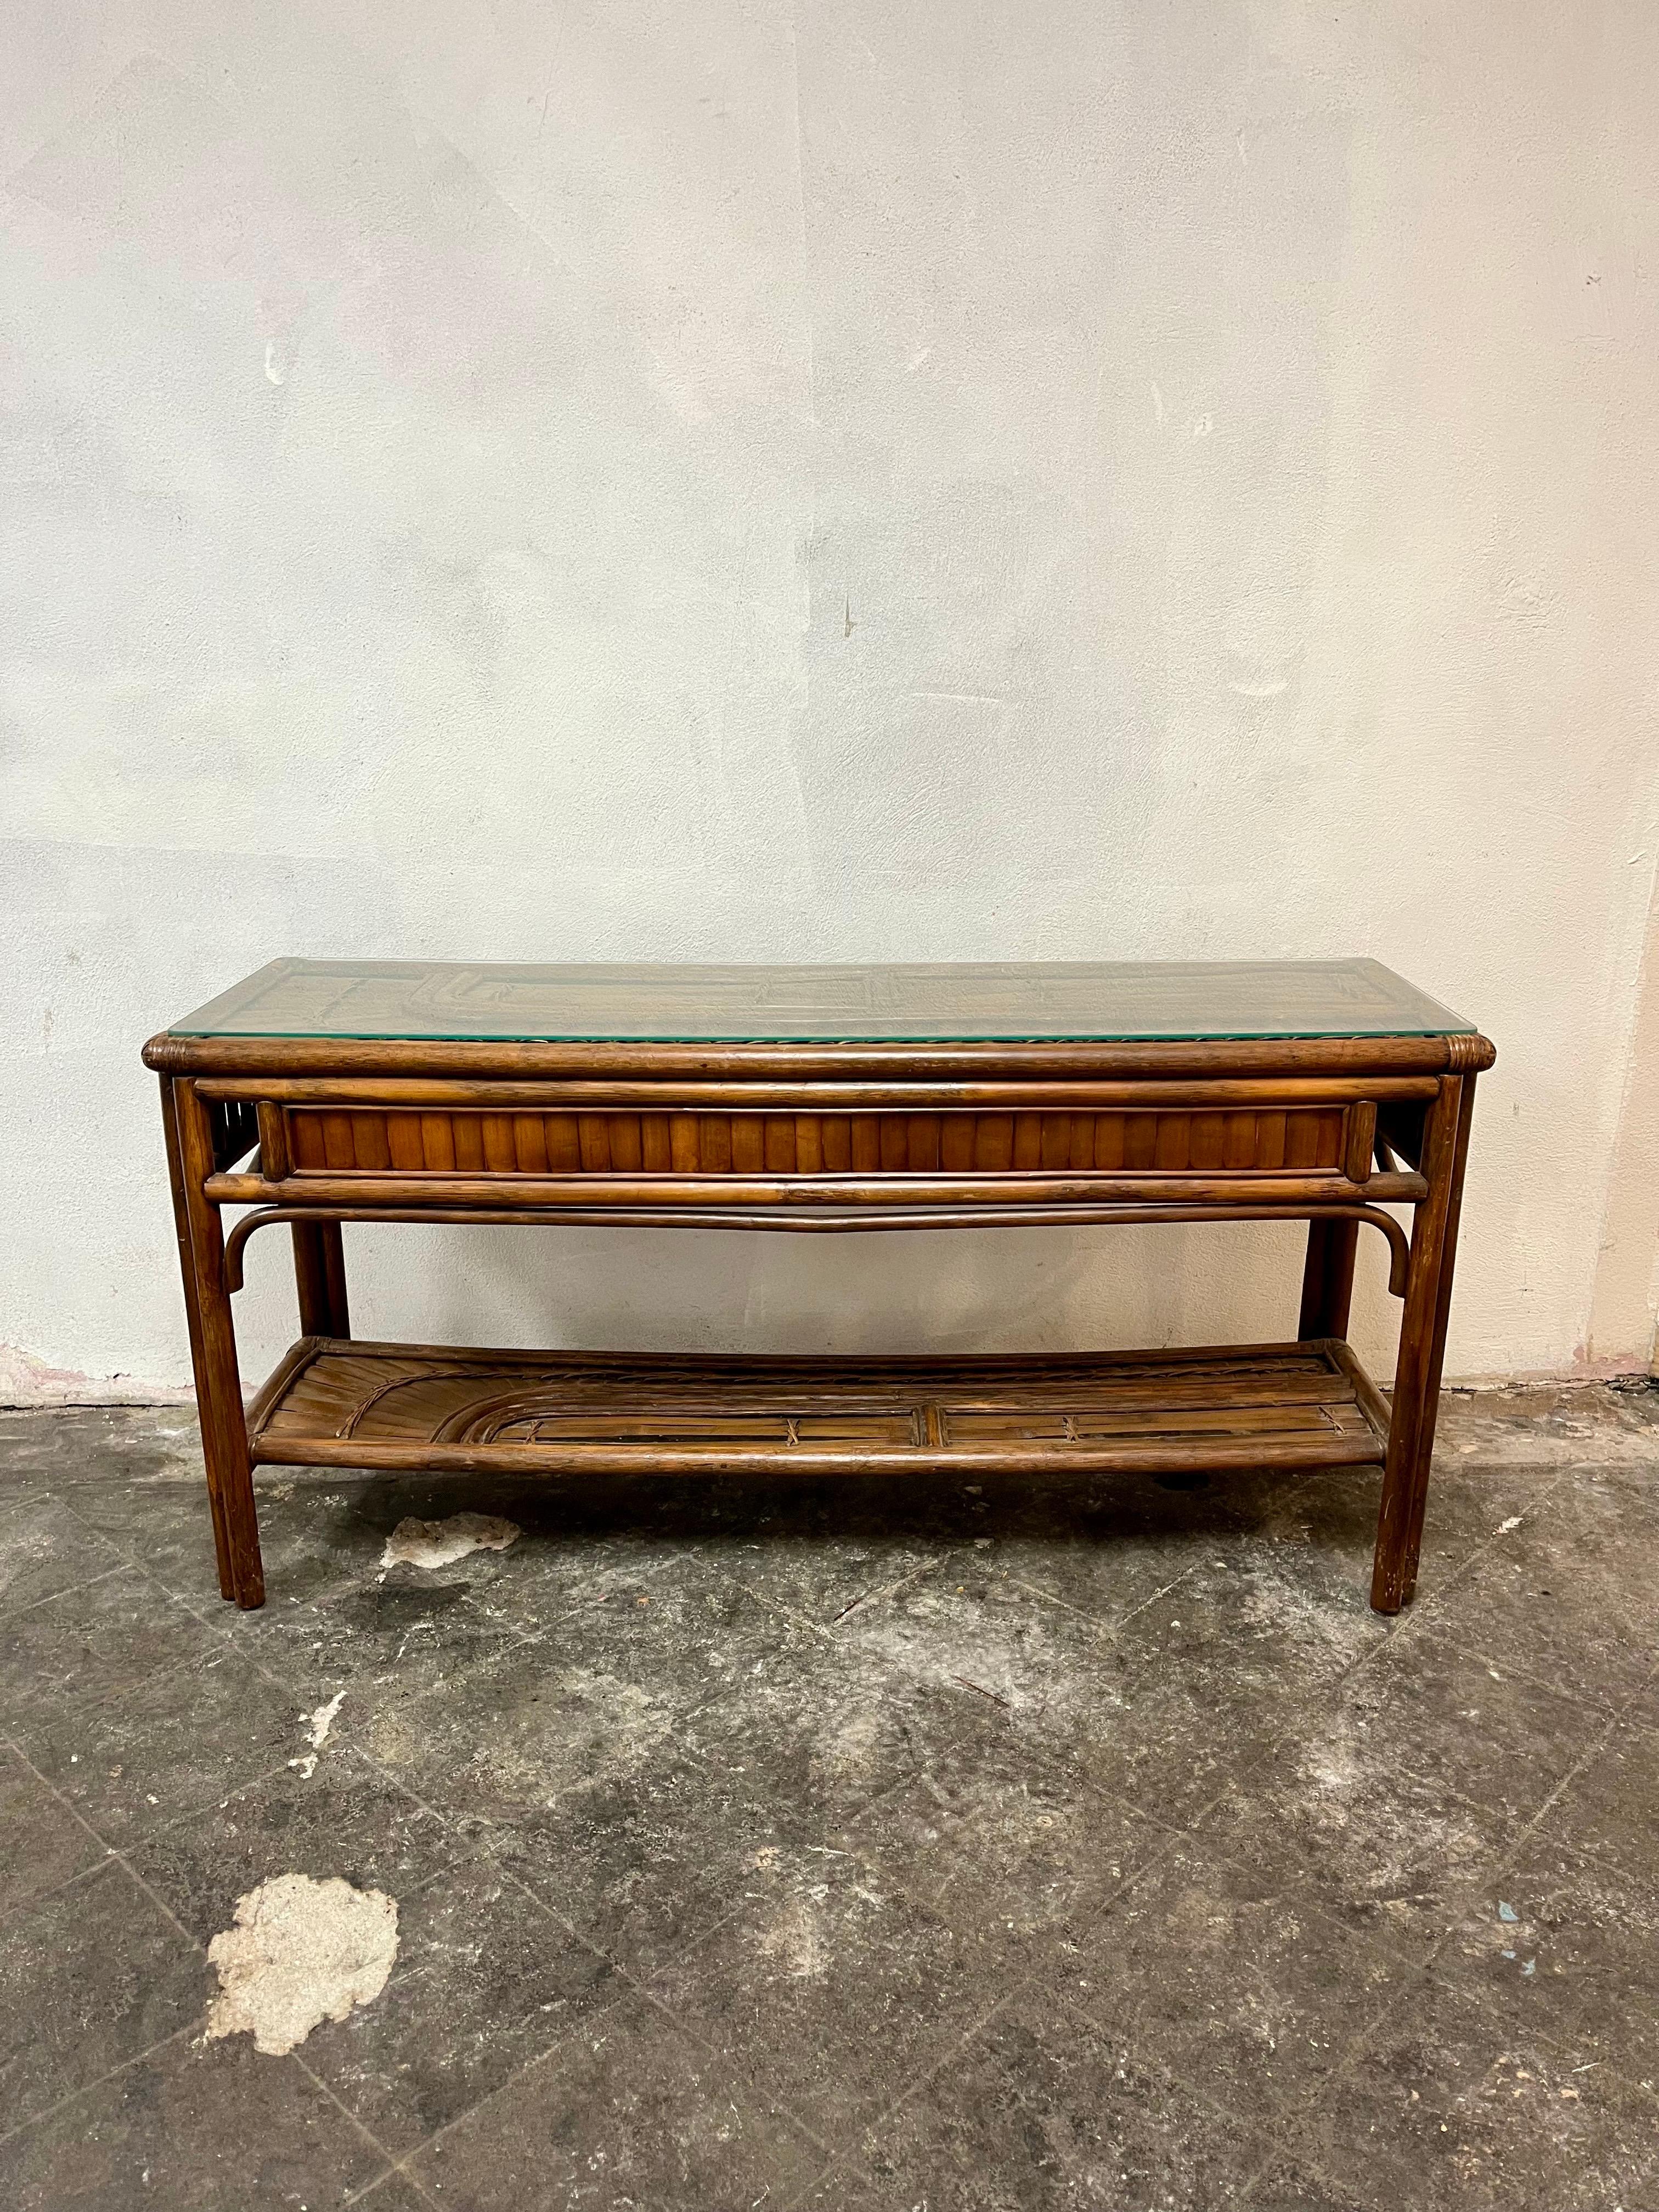 Beautiful console or sofa table with split bamboo detail. Lovely fanning of bamboo and interwoven lacing. Screams Gabriella Crespi Rising Sun styling. Solid and sturdy with glass top.
Curbside to NYC/Philly $350